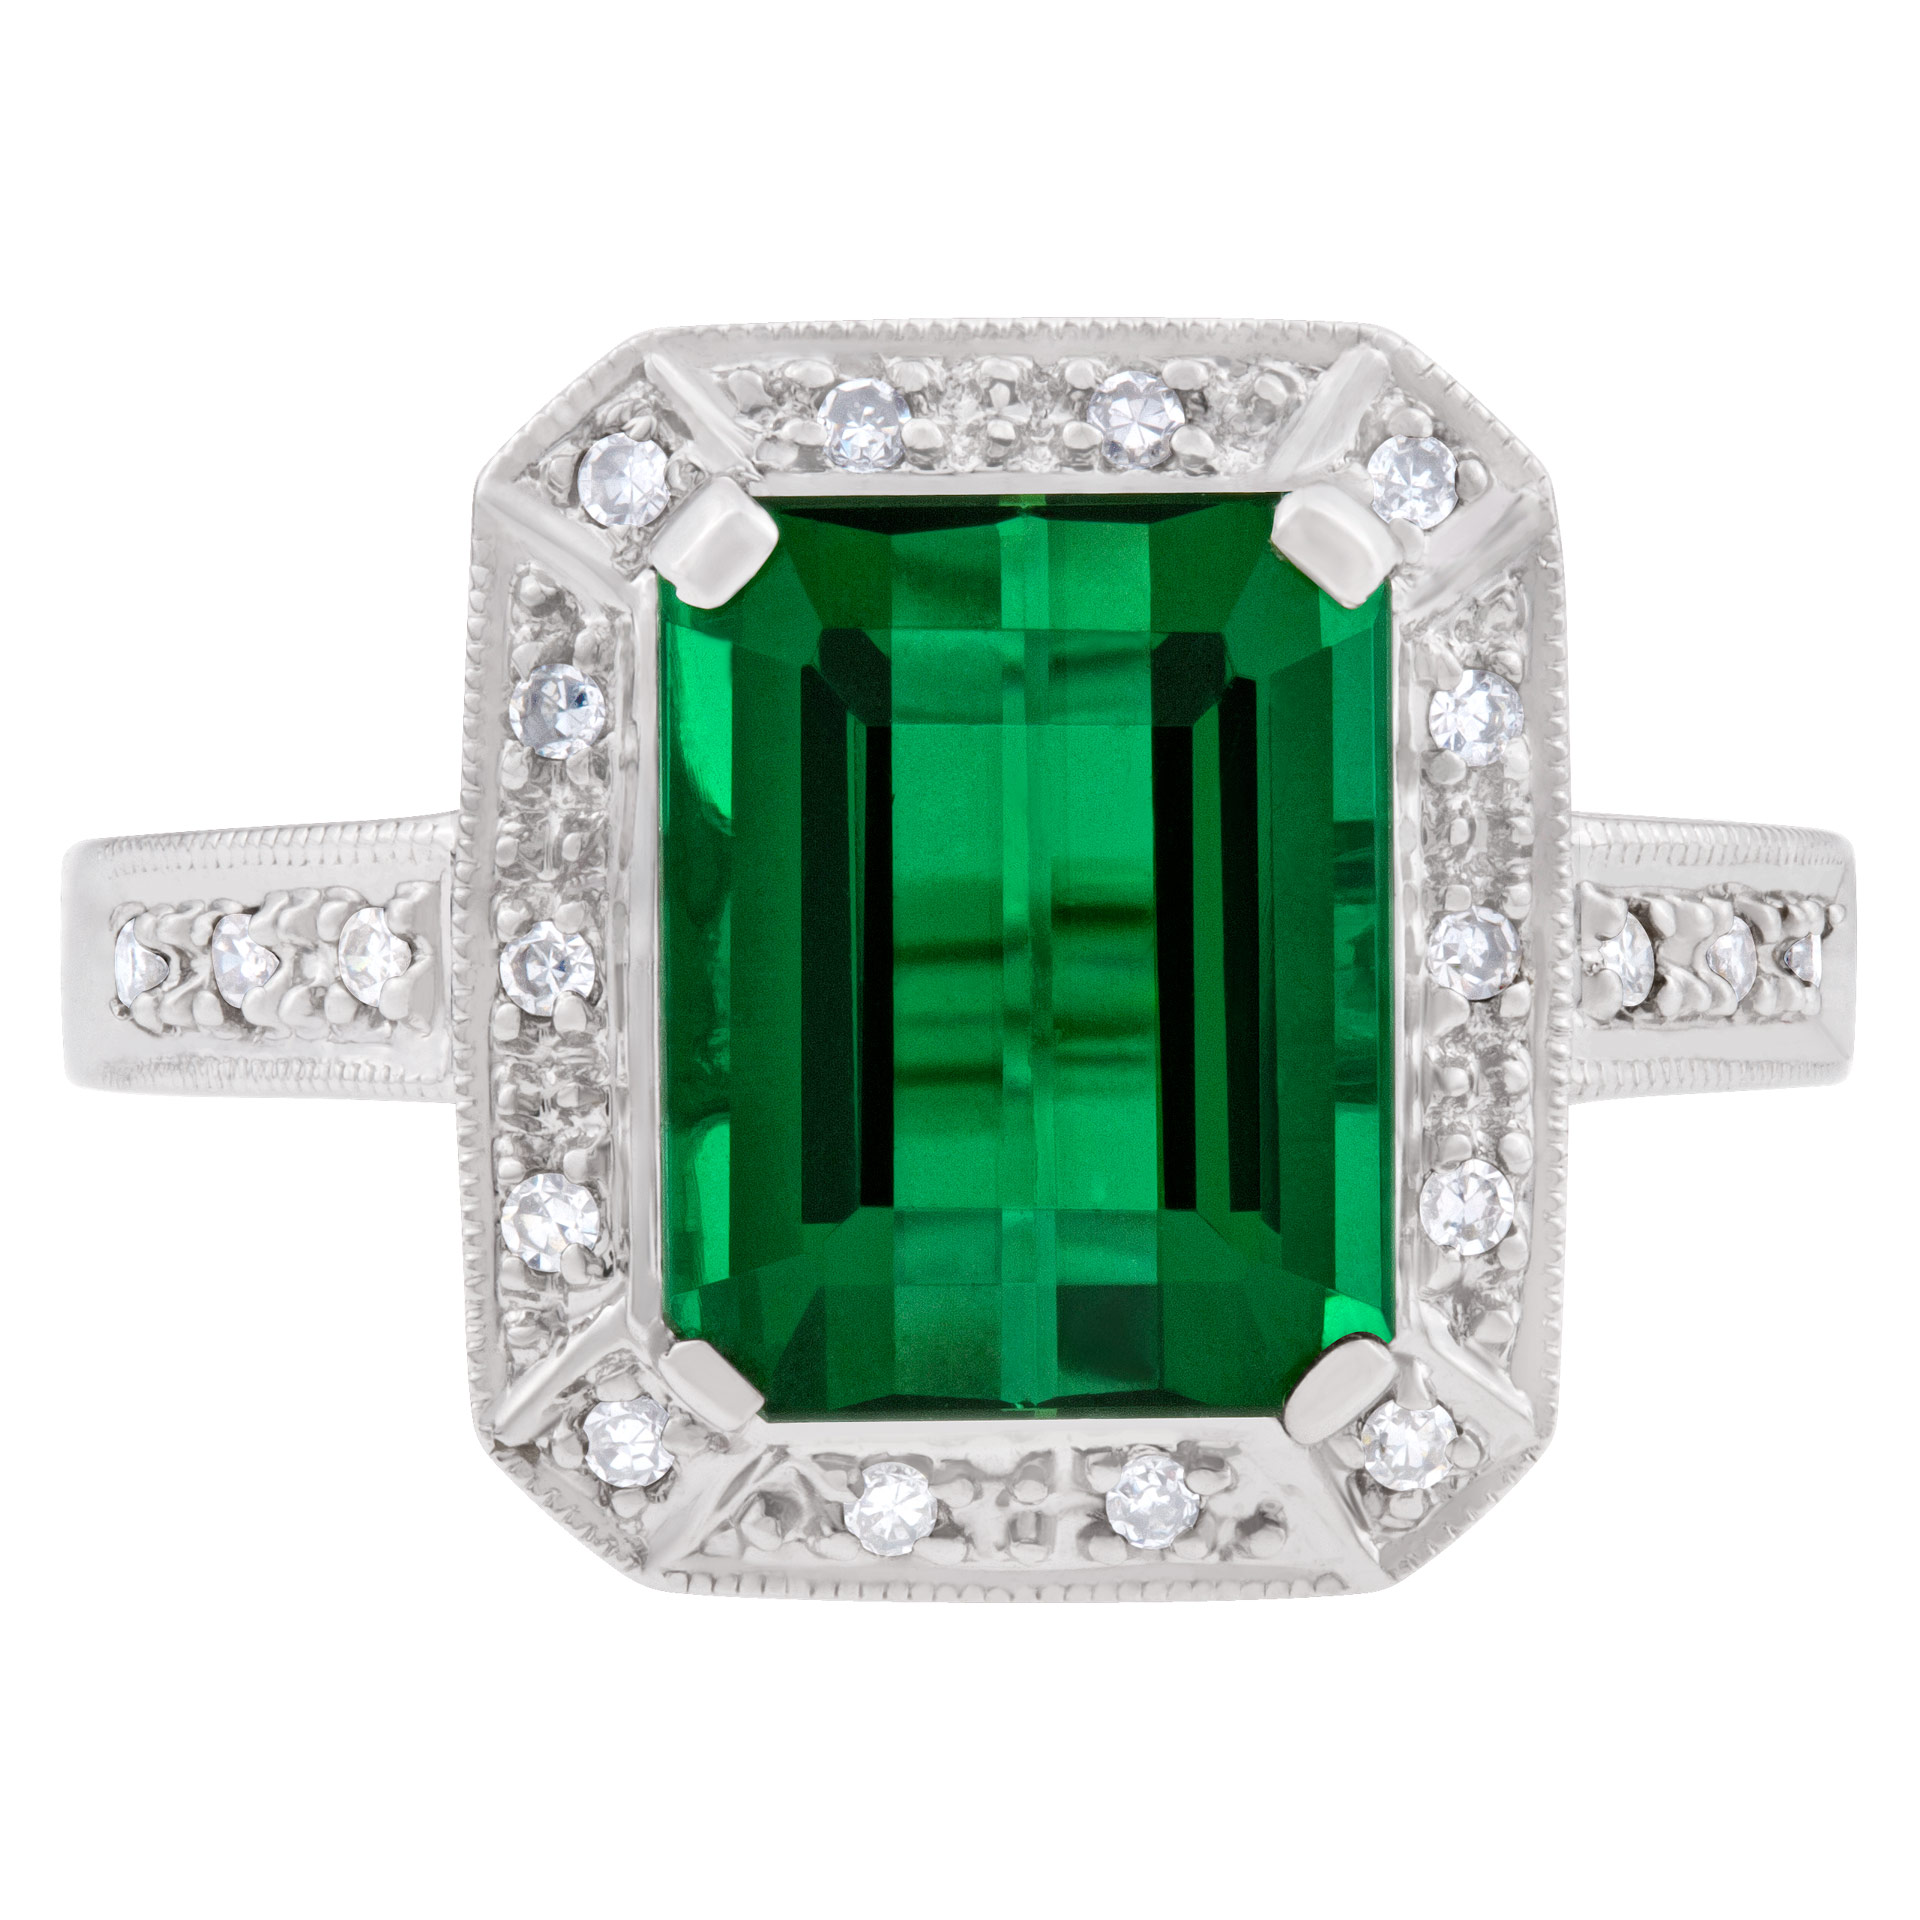 Green Tourmaline ring in 18K white gold 3.75ct diamond accents